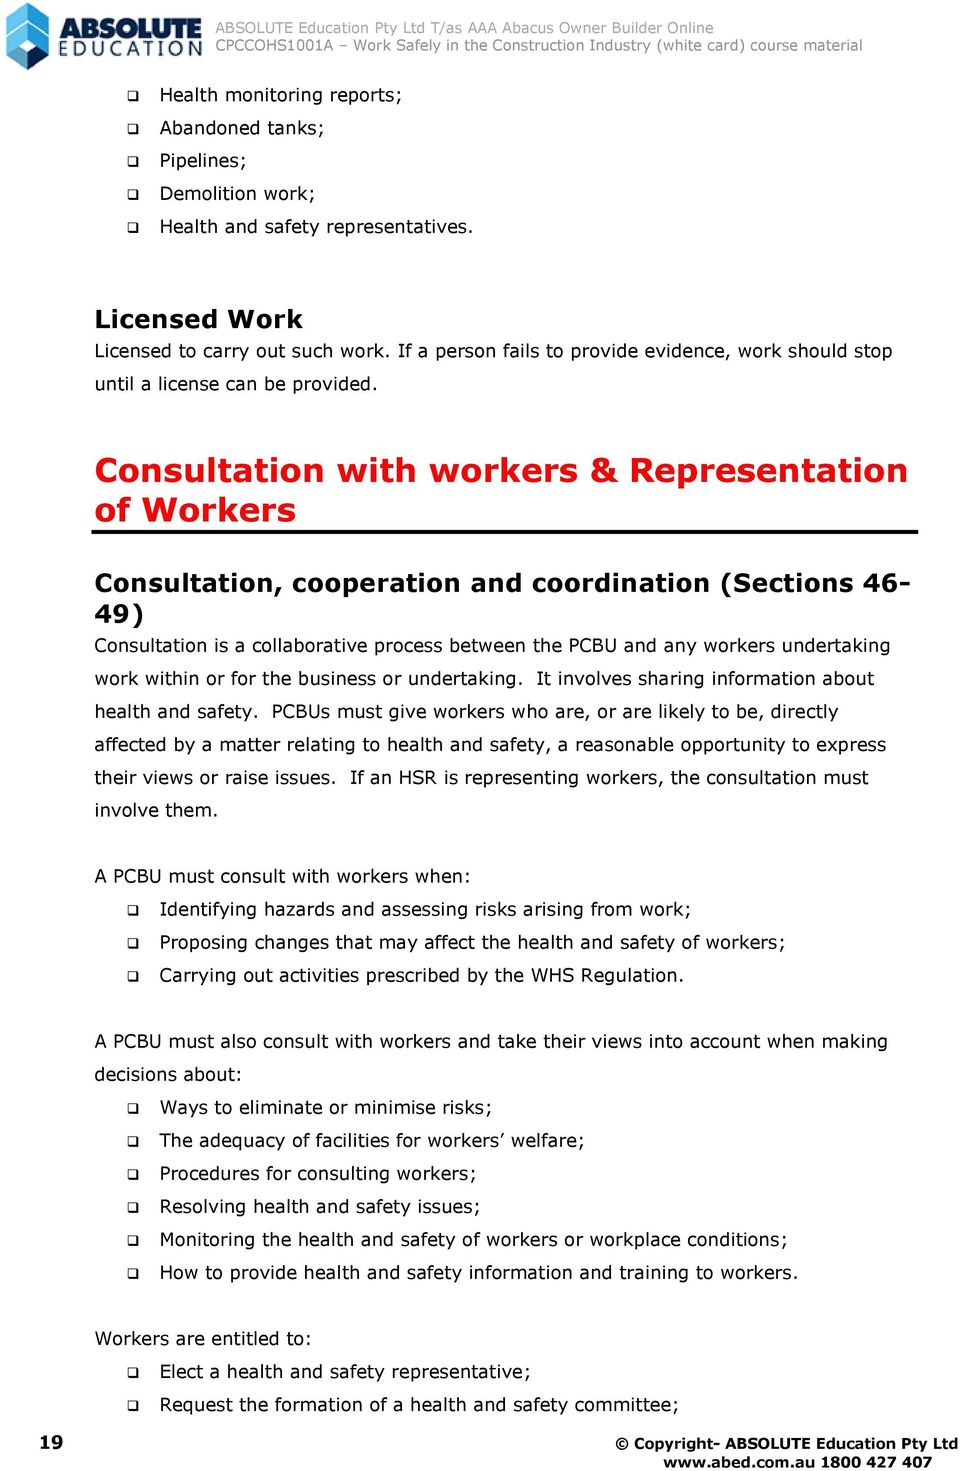 Consultation with workers & Representation of Workers Consultation, cooperation and coordination (Sections 46-49) Consultation is a collaborative process between the PCBU and any workers undertaking